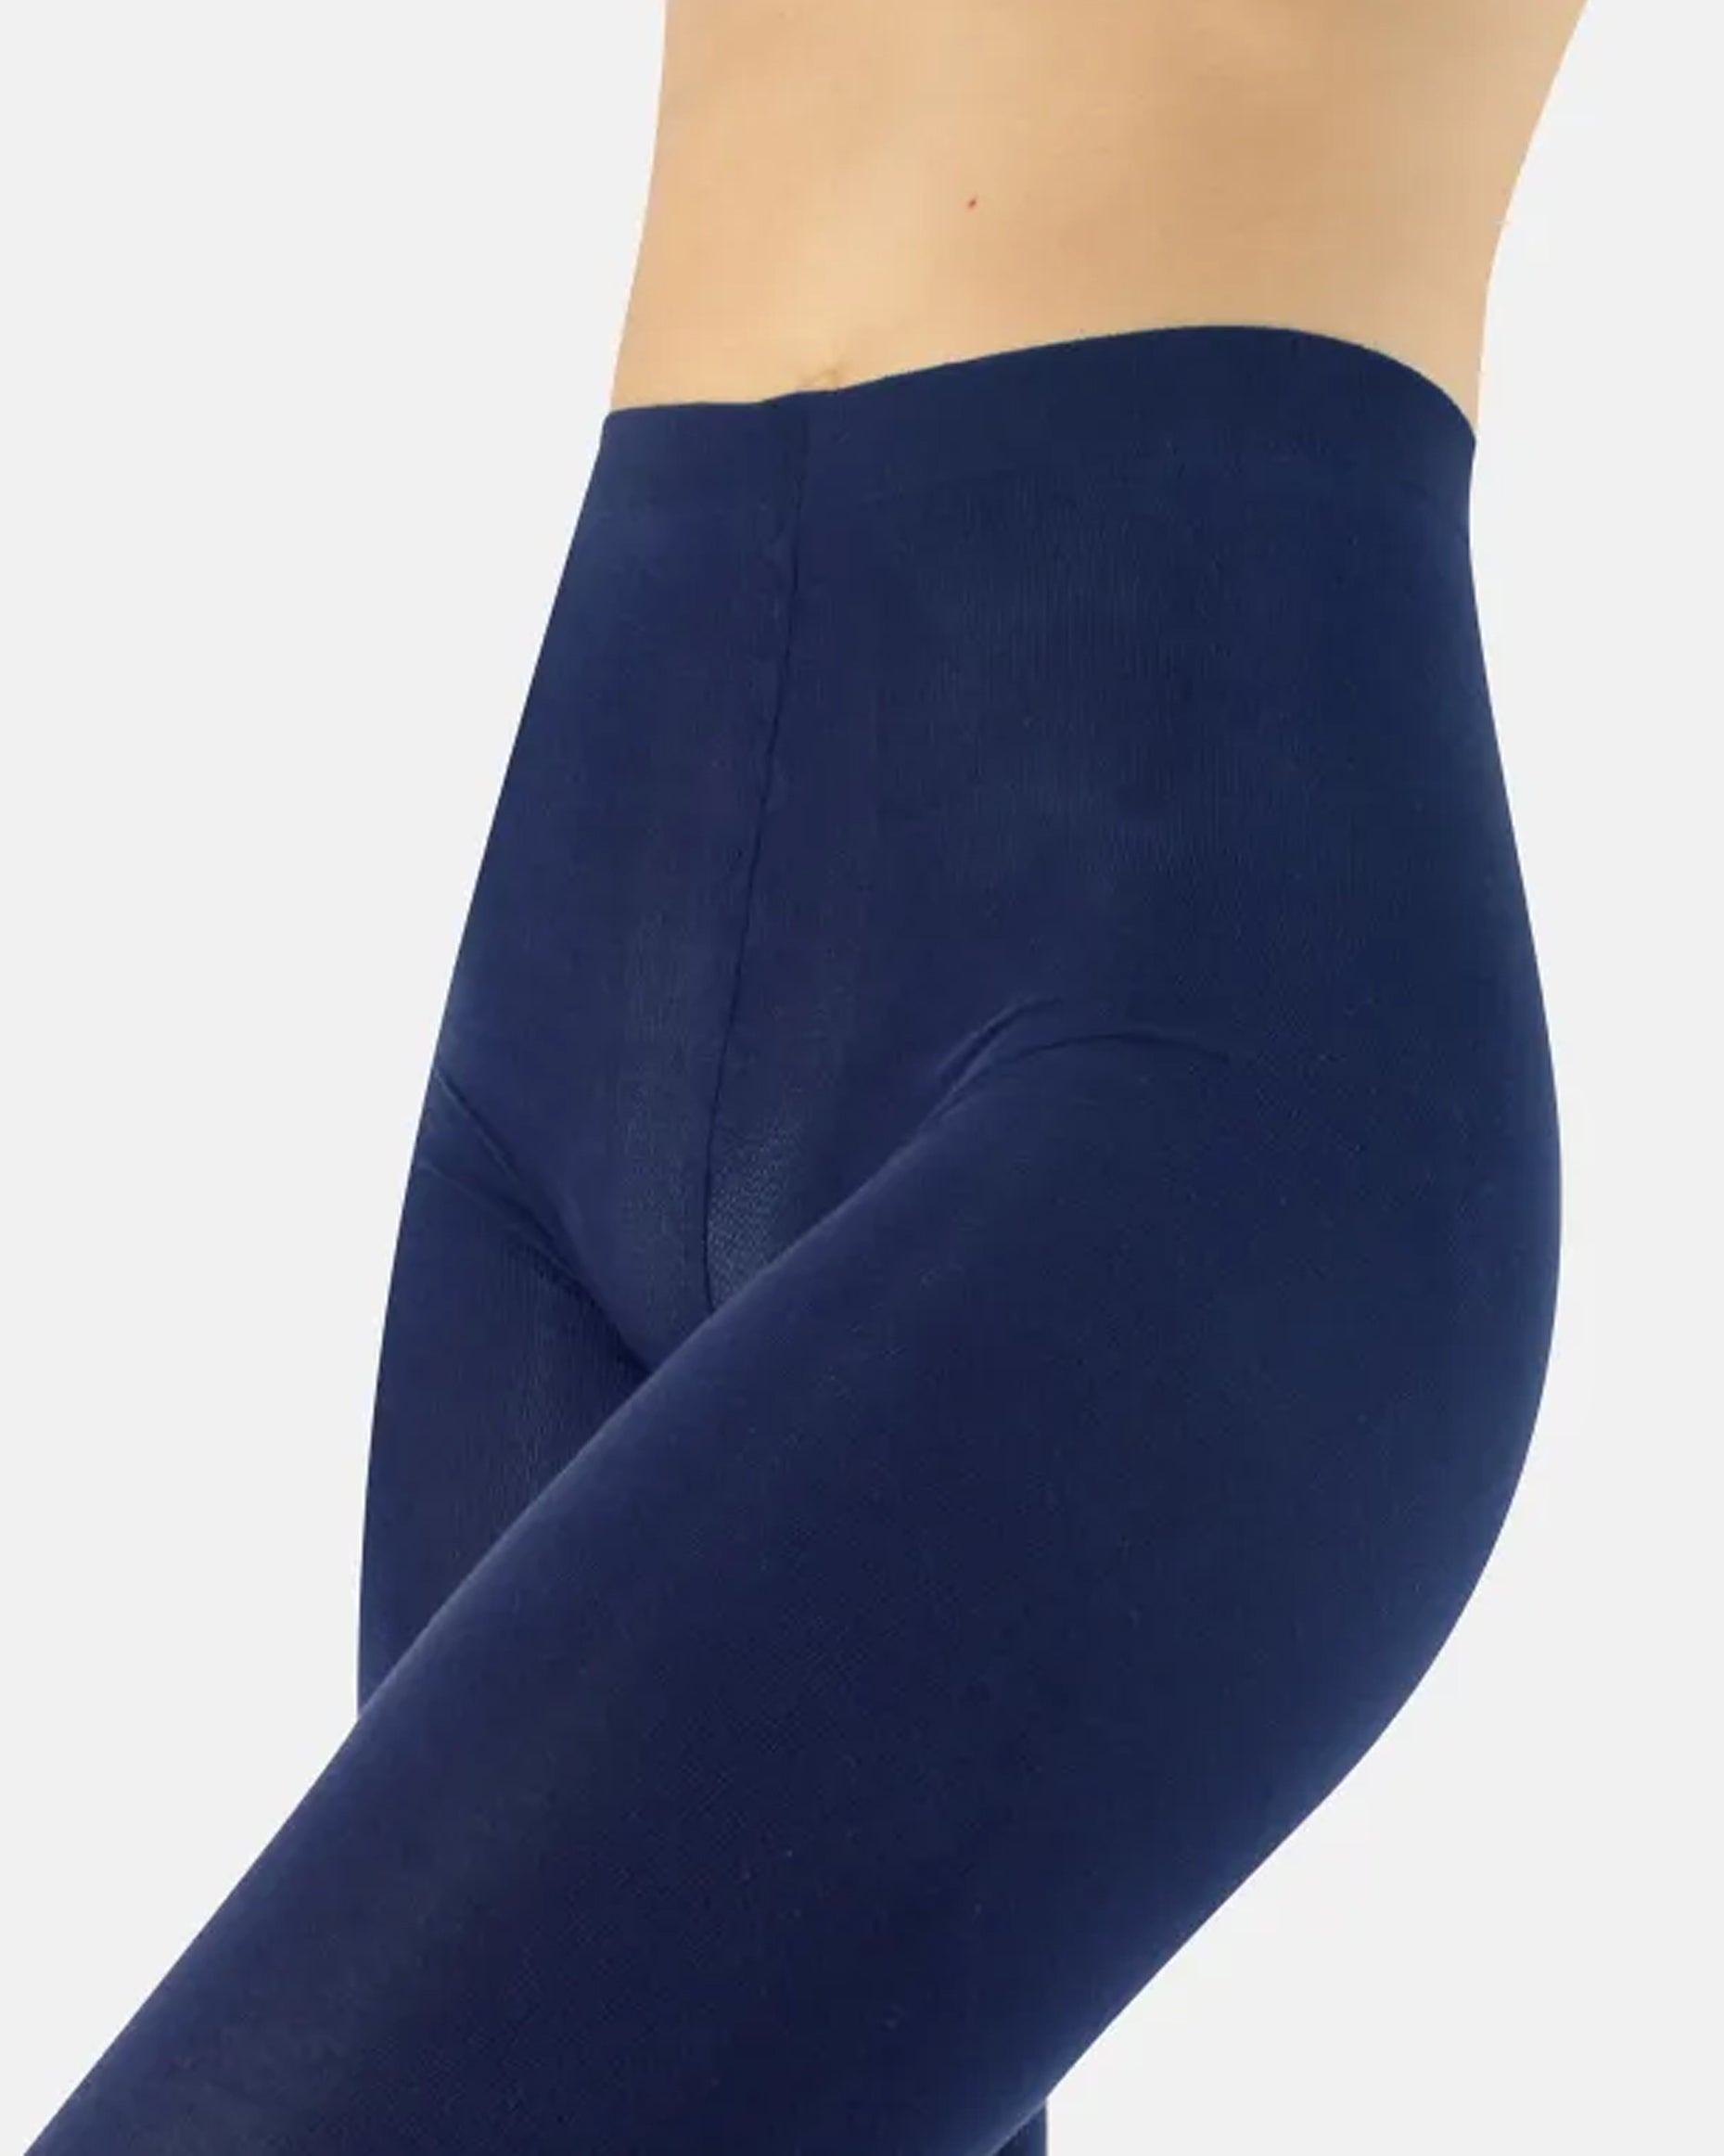 Calzitaly Cotton Tights detail - Warm navy blue knitted cotton mix tights with gusset, flat seams and comfort waist band.